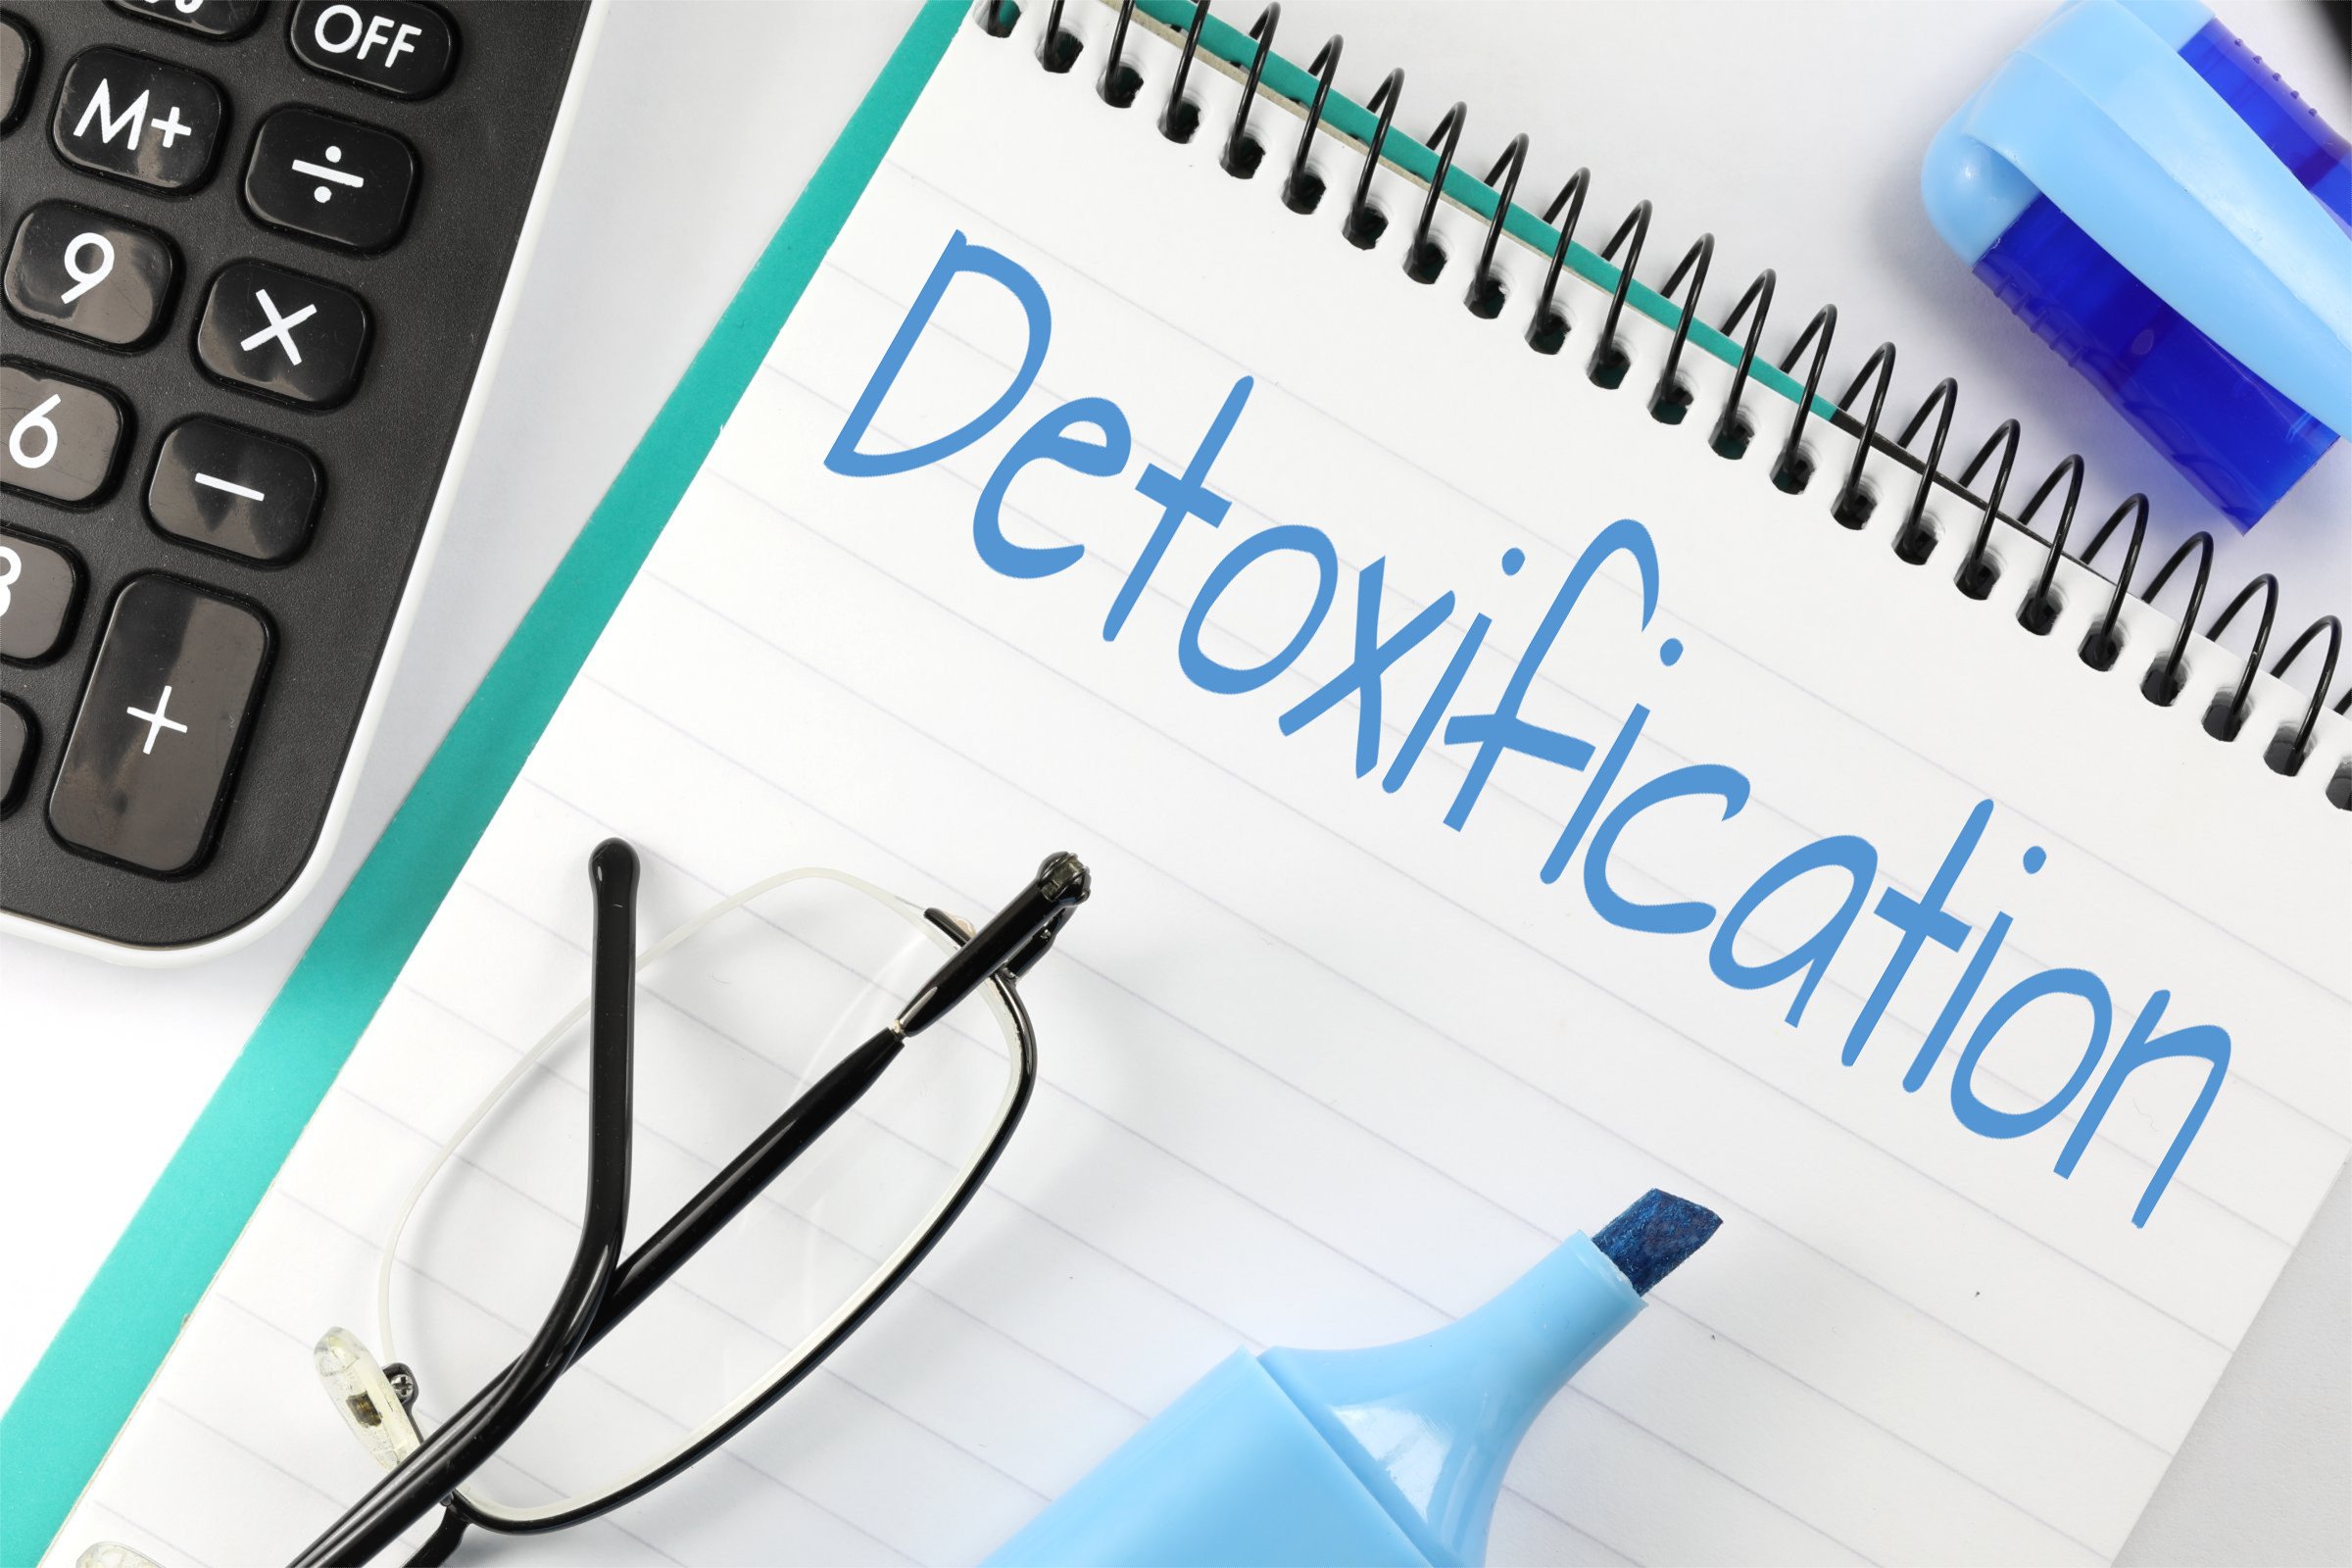 2. Uncover the Benefits of Detoxification